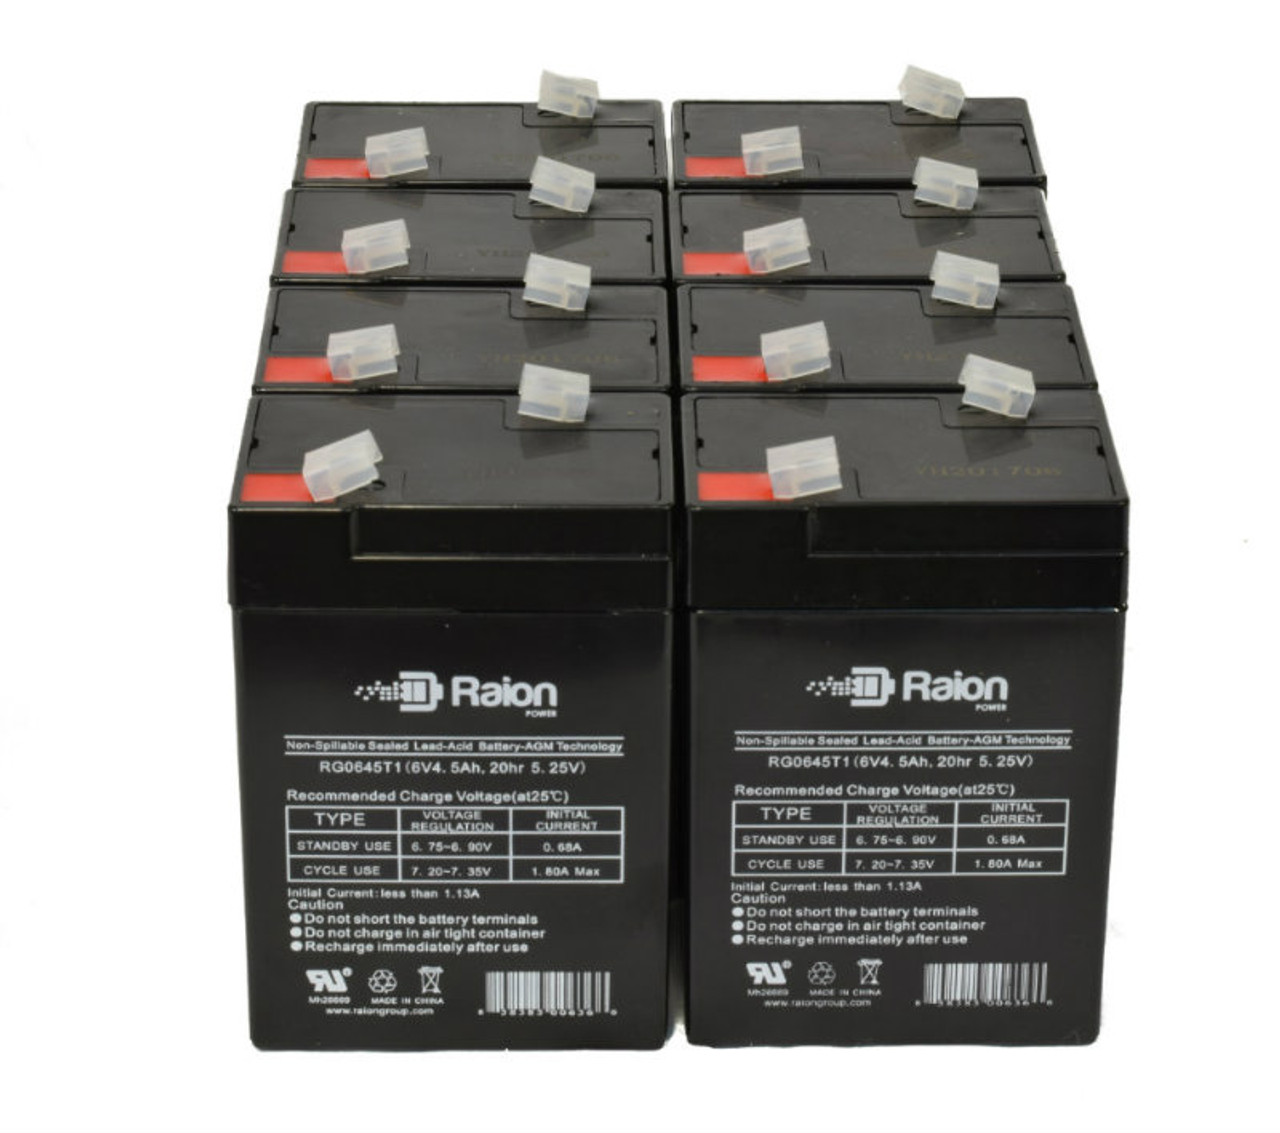 Raion Power 6 Volt 4.5Ah RG0645T1 Replacement Battery for Jasco RB640 - 8 Pack